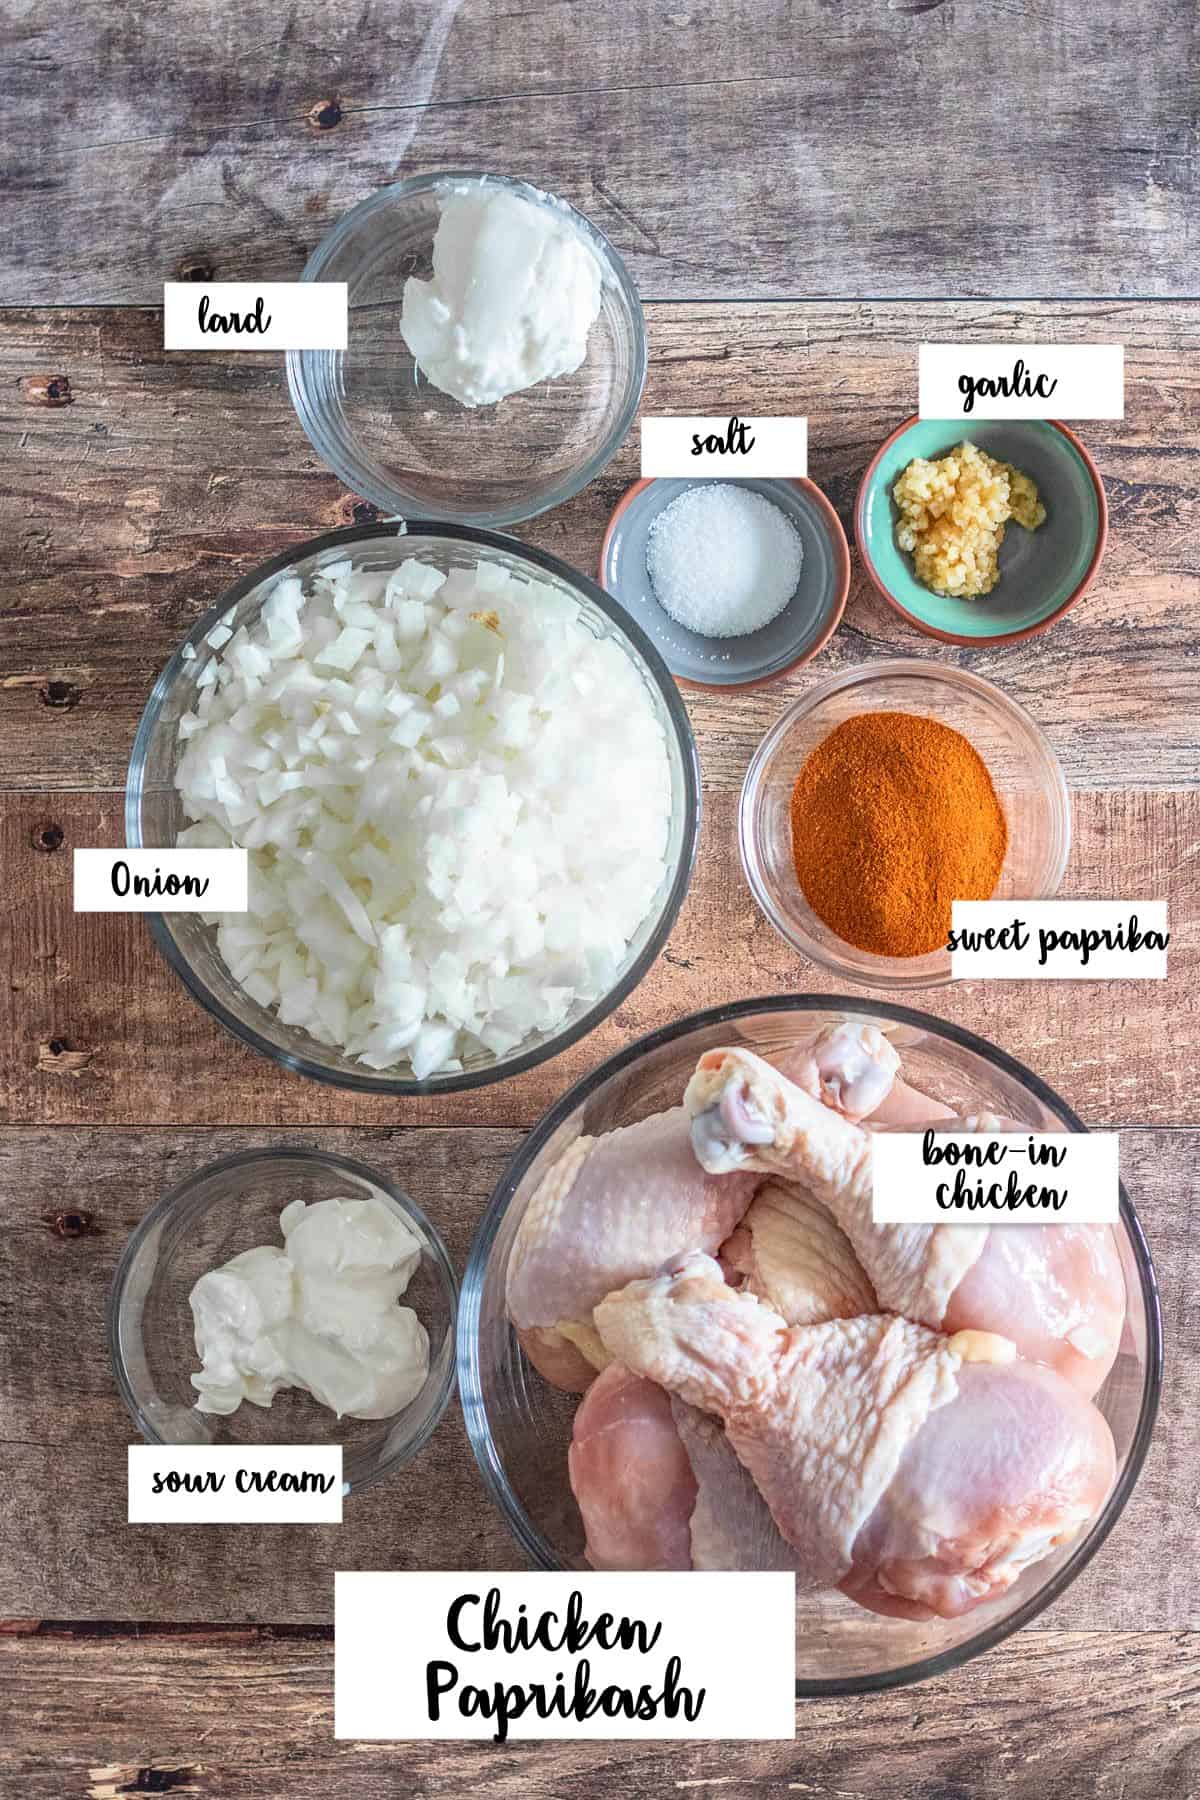 Ingredients shown are used to prepare Chicken Paprikash. 